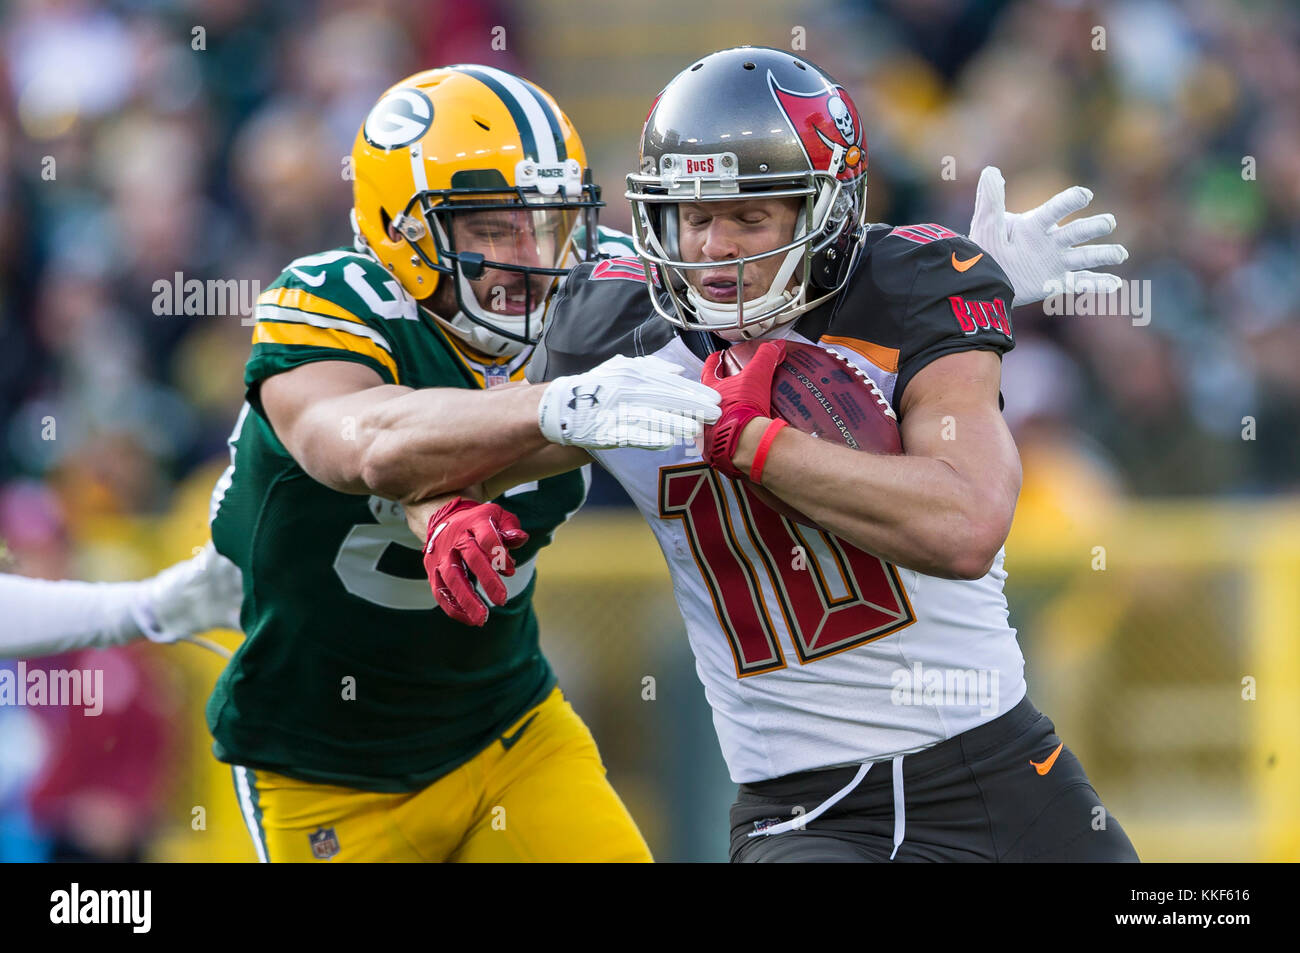 December 3, 2017: Green Bay Packers Jeff Janis #83 tackles Tampa Bay Buccaneers punt returner Adam Humphries #10 during the NFL Football game between the Tampa Bay Buccaneers and the Green Bay Packers at Lambeau Field in Green Bay, WI. Packers defeated the Buccaneers in overtime 26-20. John Fisher/CSM Stock Photo